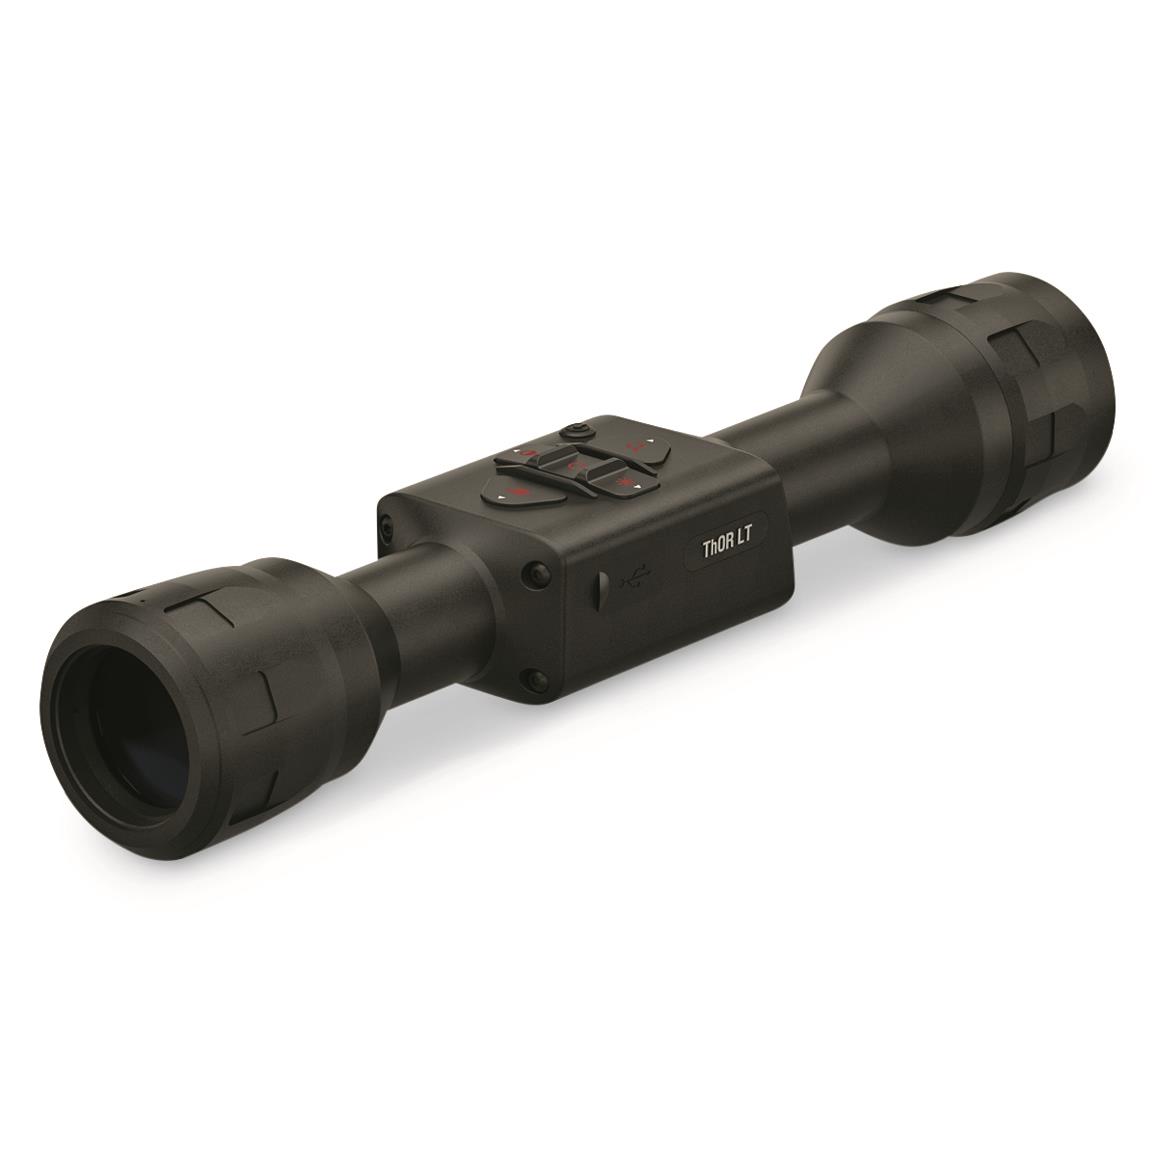 ATN ThOR LTV 640 3-9x Thermal Rifle Scope with Video Recording